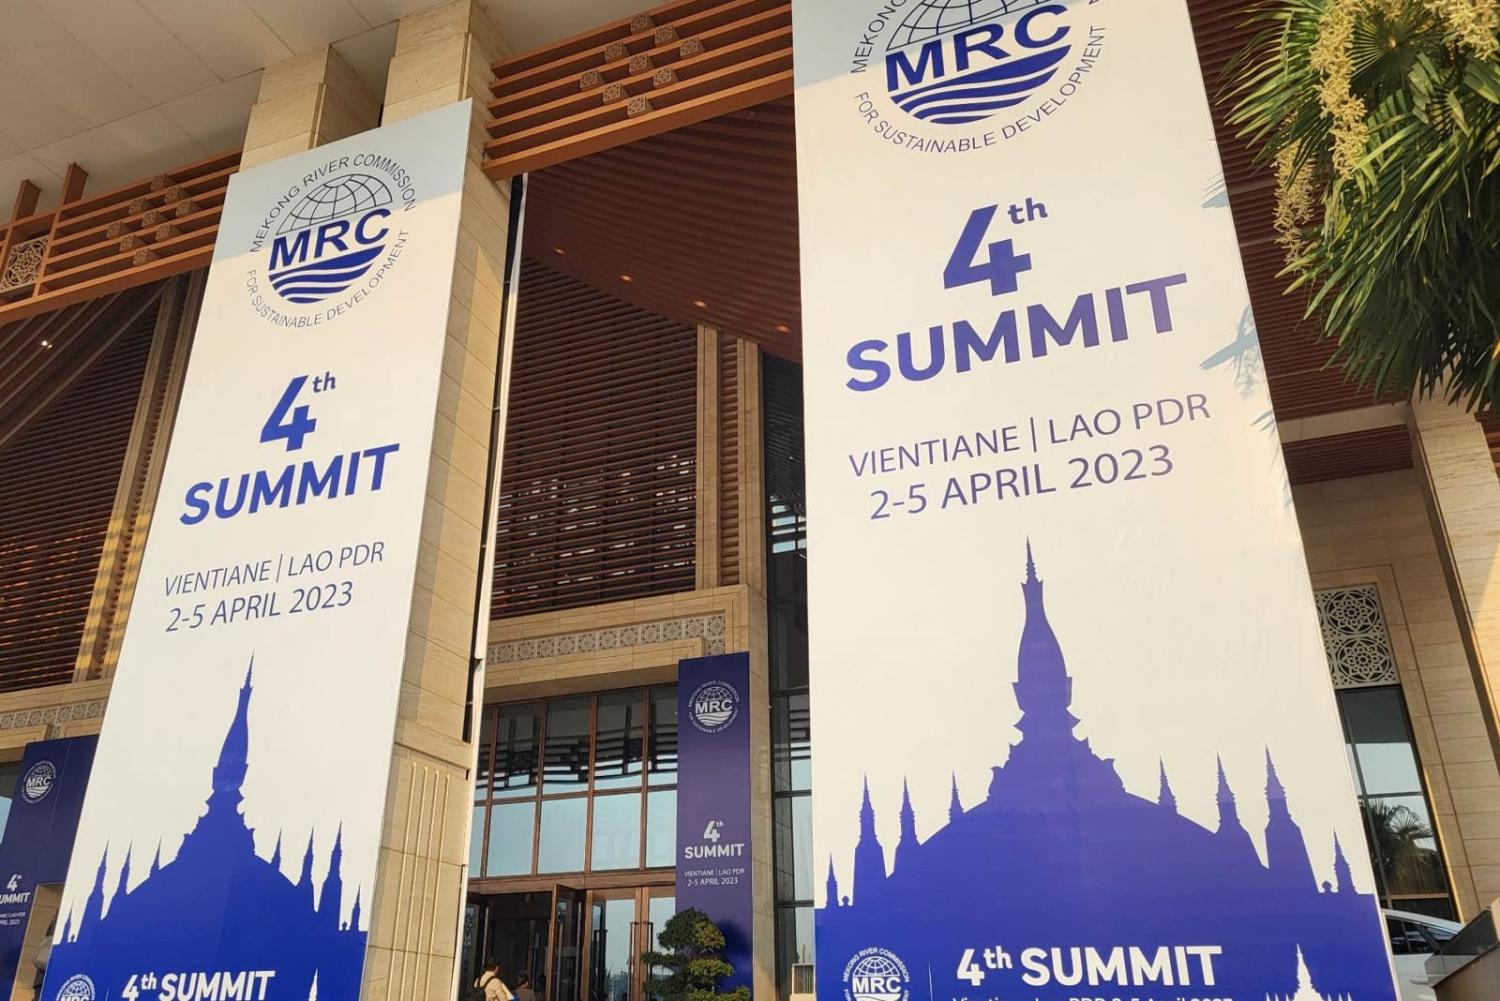 Welcoming participants to the MRC leaders meeting and conference in Vientiane, Laos (Andrea Haefner)